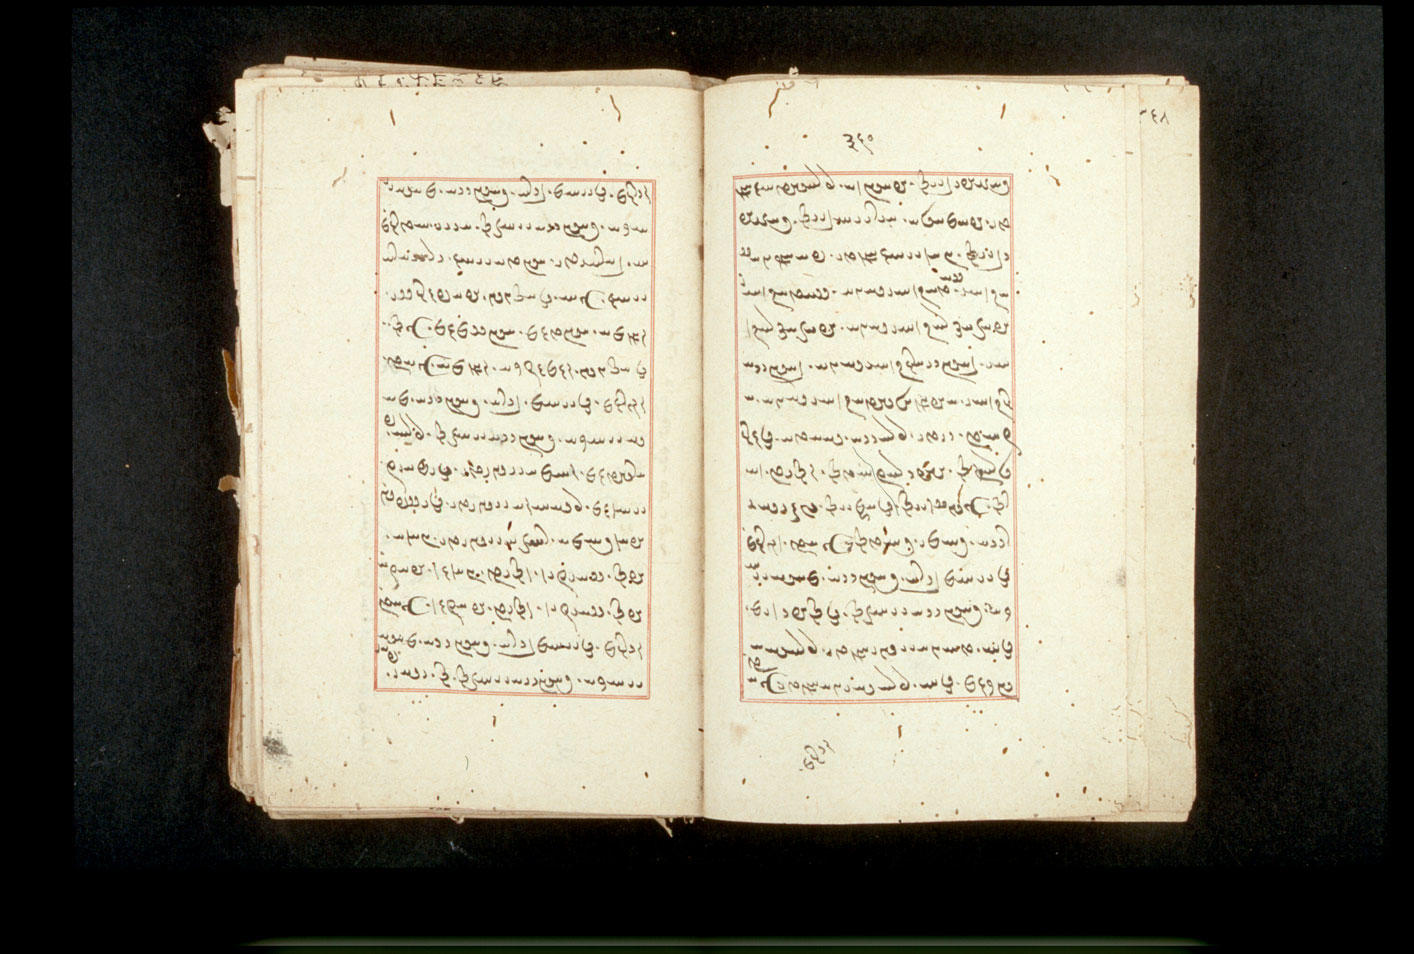 Folios 360v (right) and 361r (left)